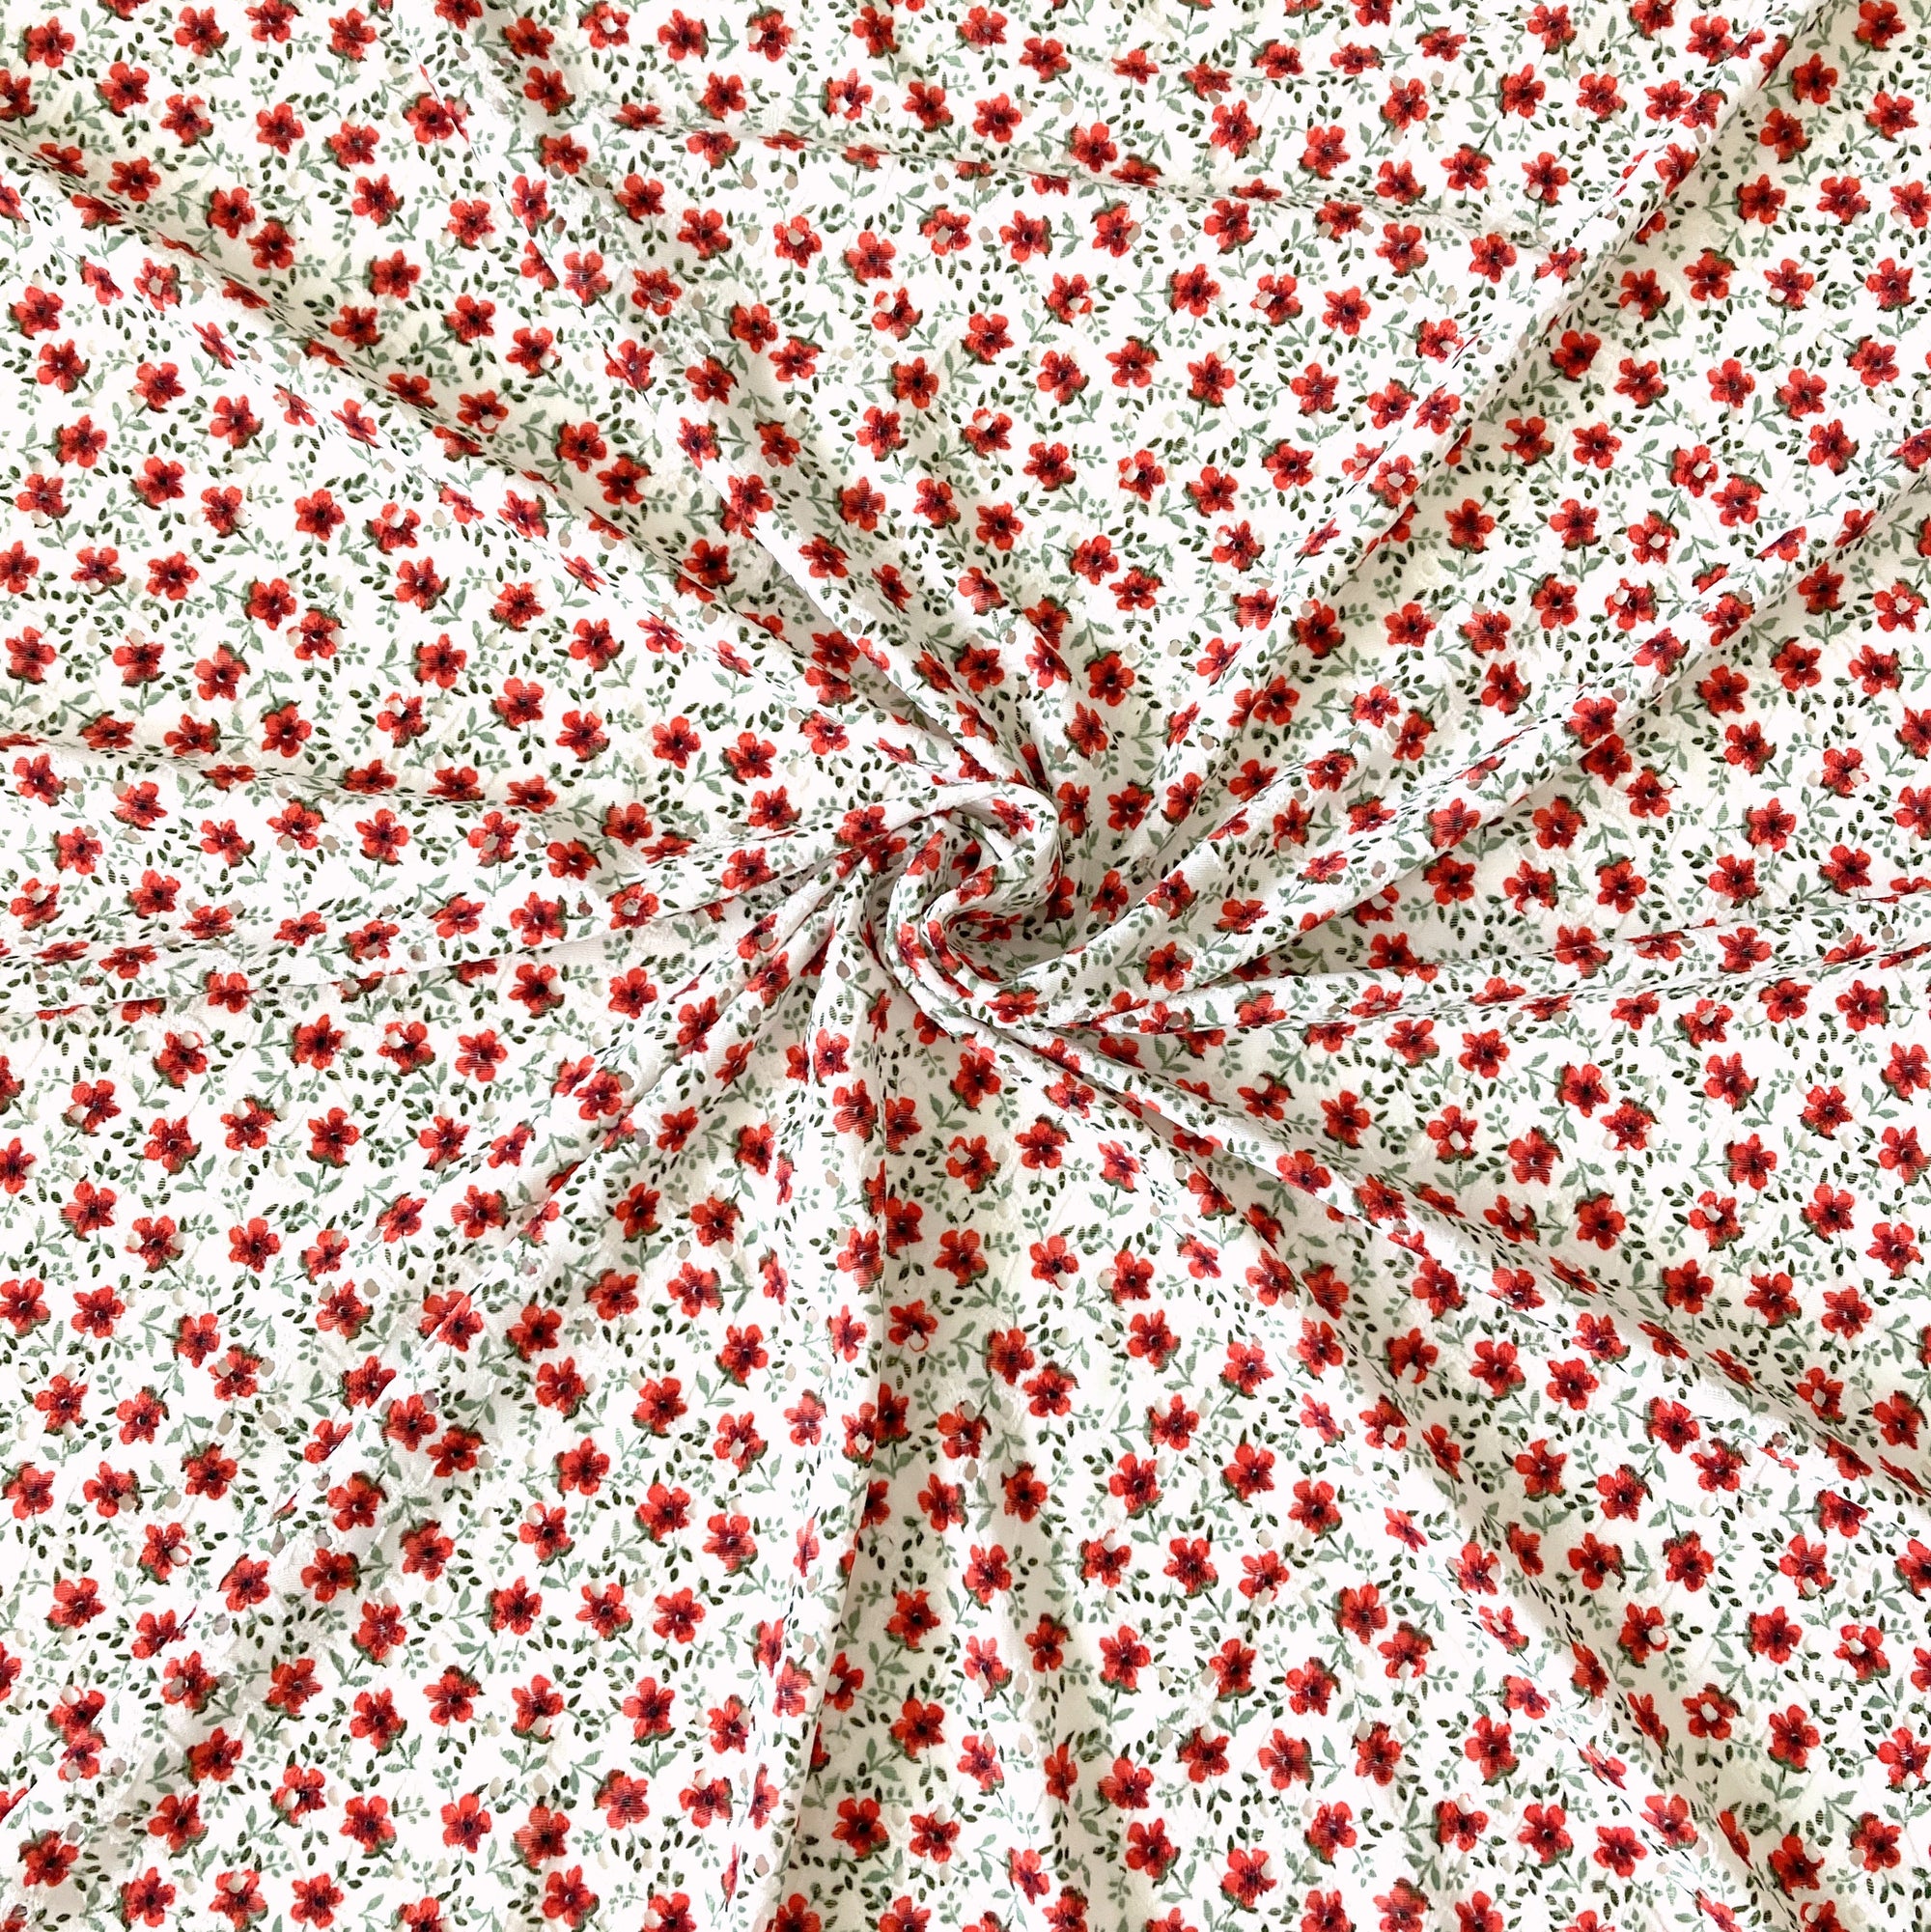 White Sage and Red Pansy Floral Print Eyelet Poly Spandex Knit Fabric, Raspberry Creek Fabrics, watermarked, restored